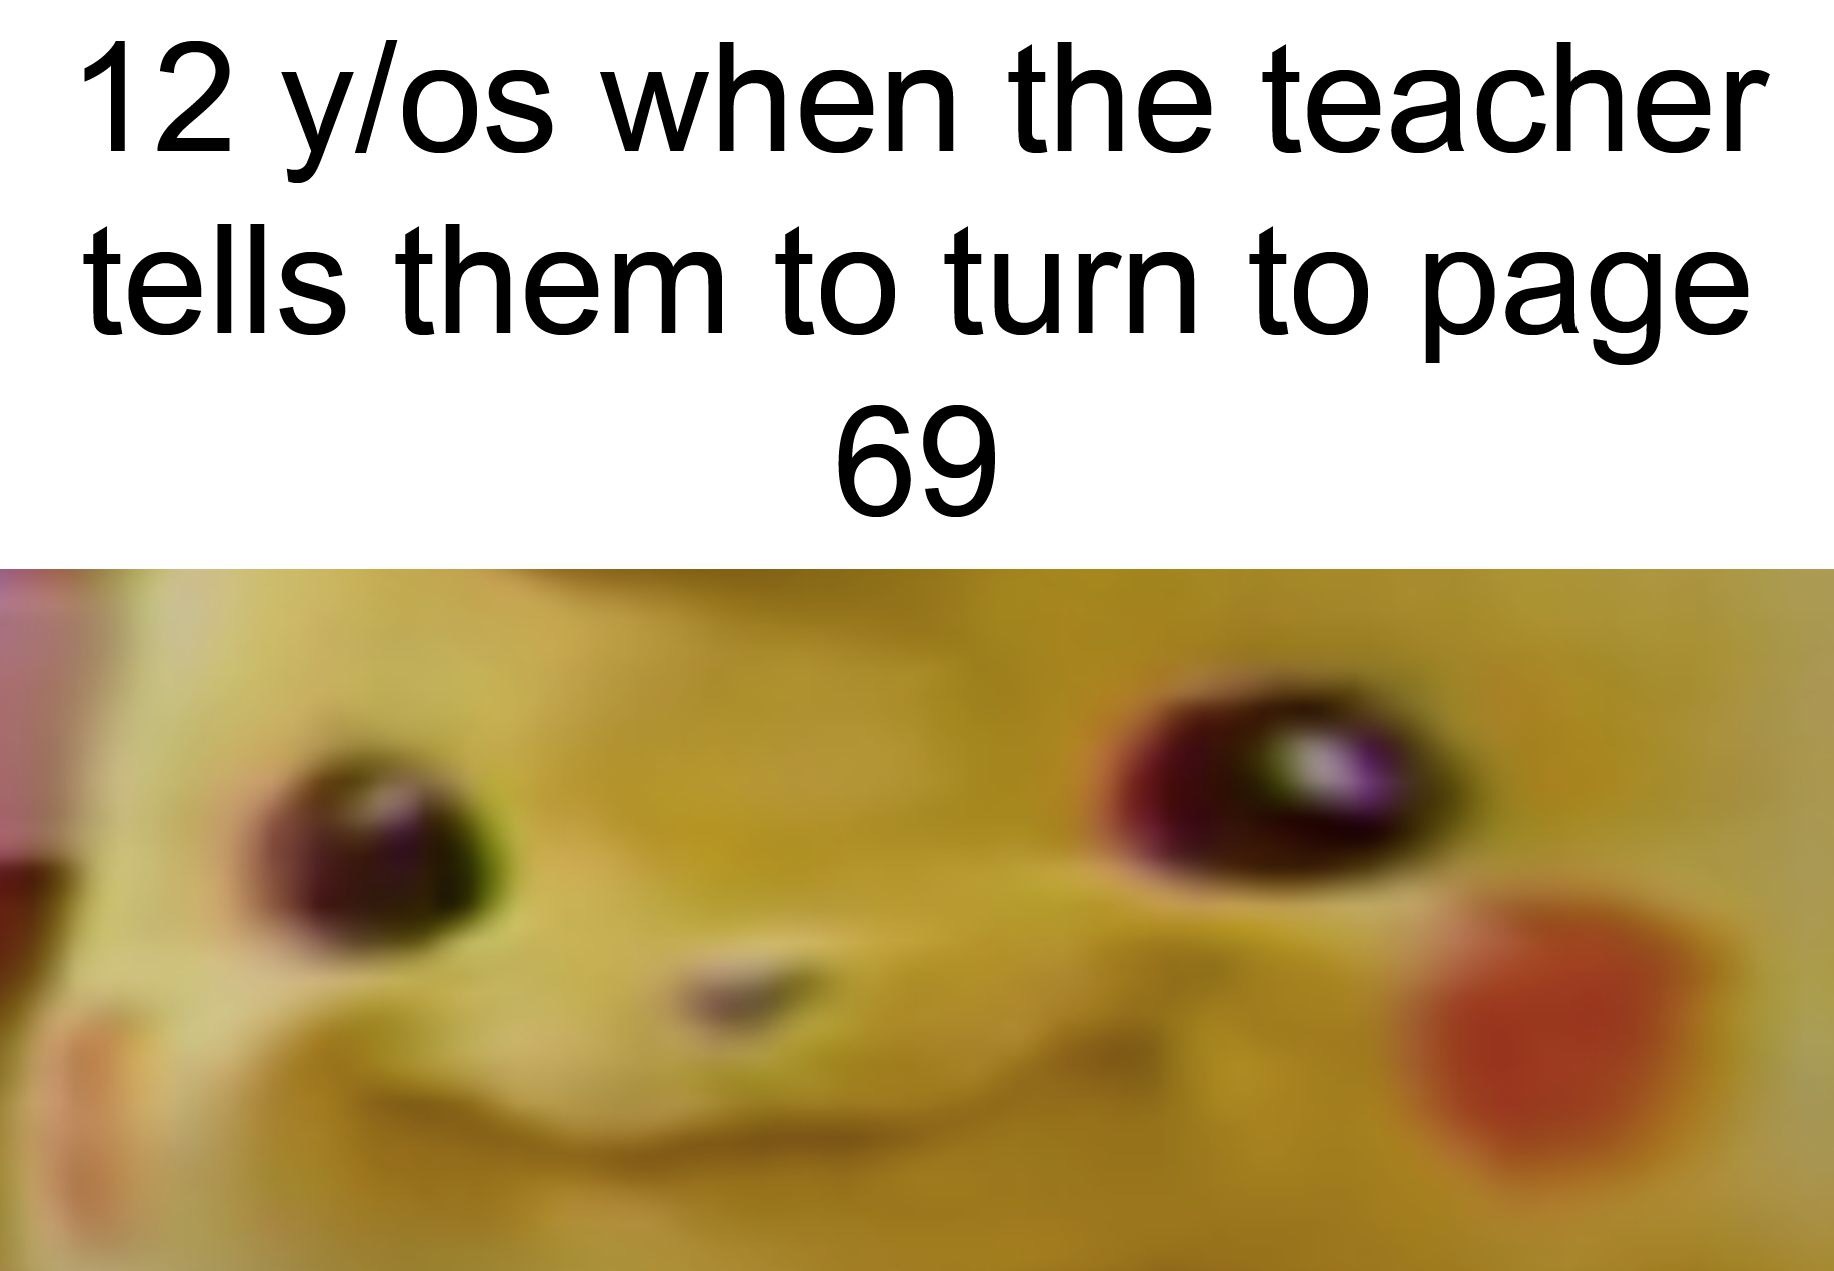 Why aren’t we using pikachu memes anymore?